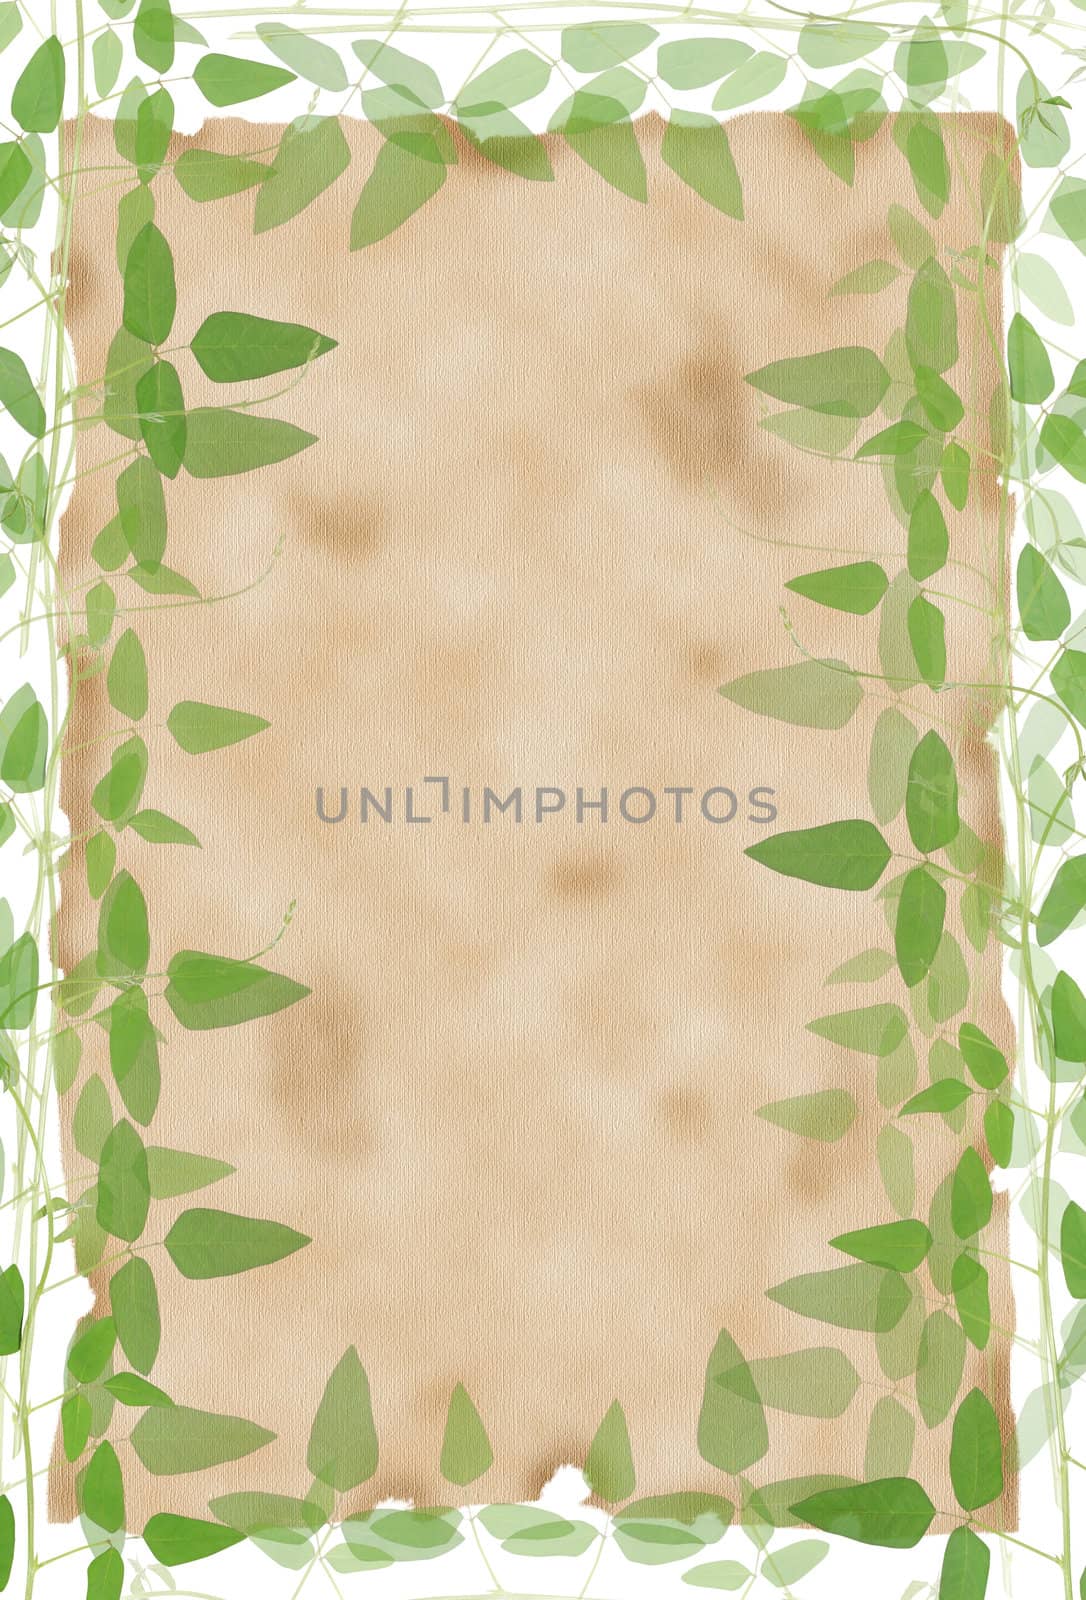 Lined paper framed by natural green leaves background  by rufous